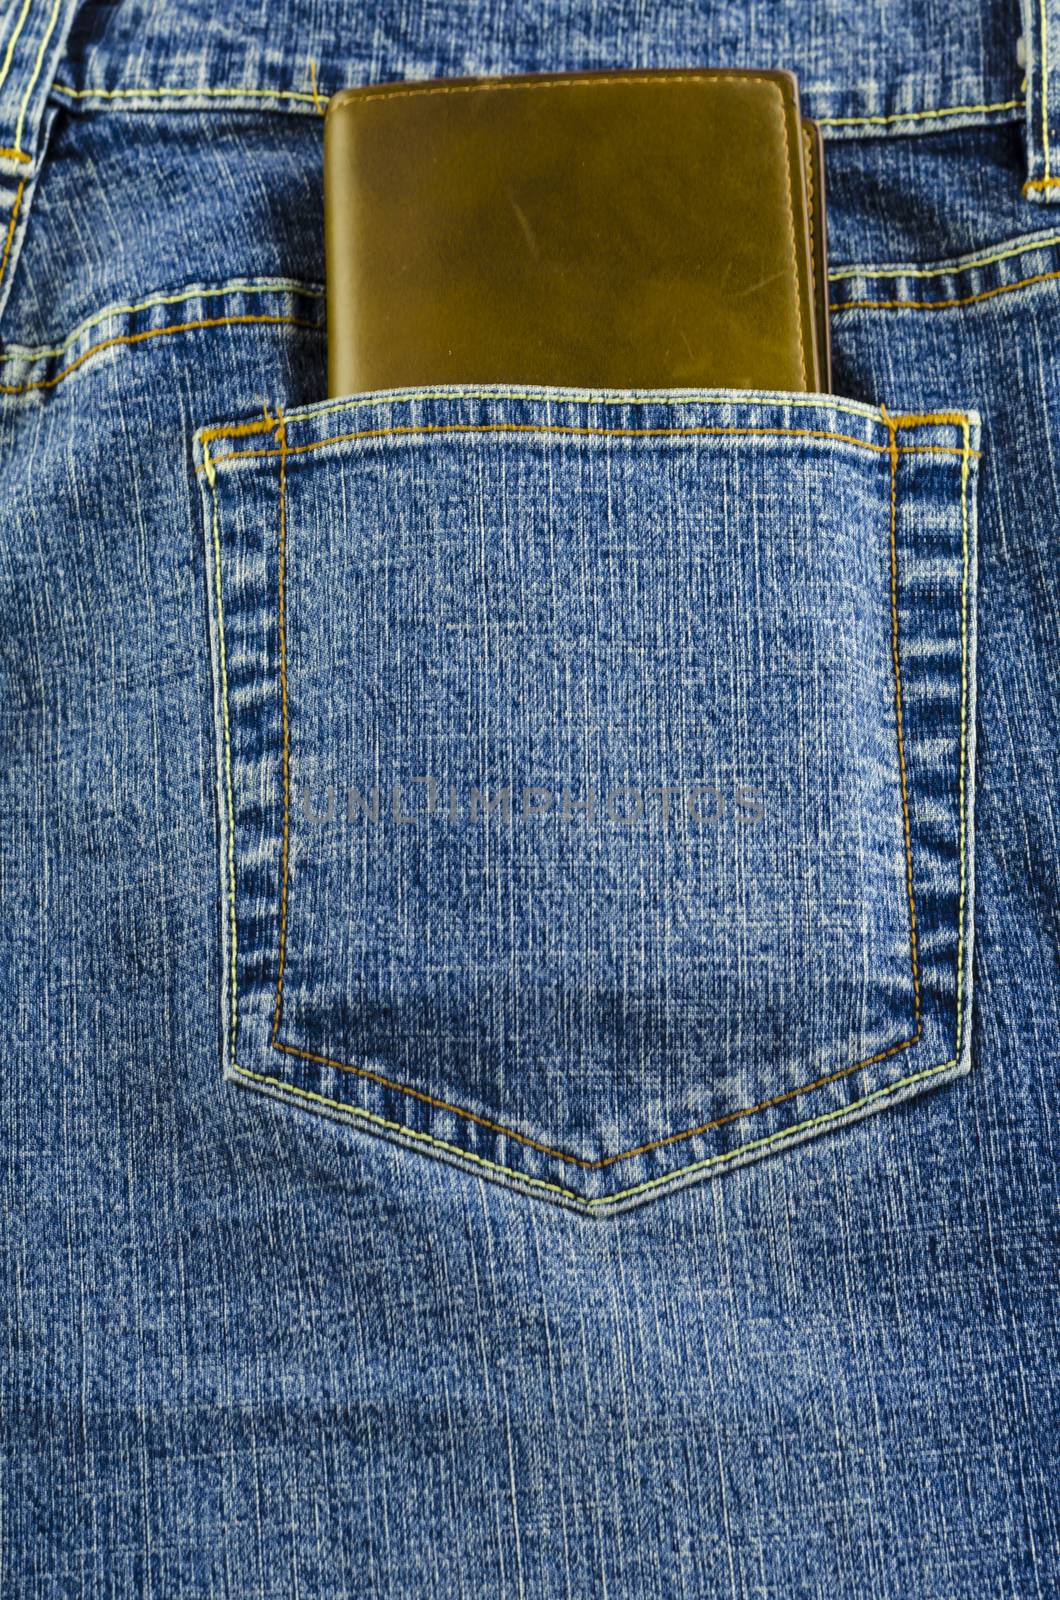 blue jeans pocket with brown wallet